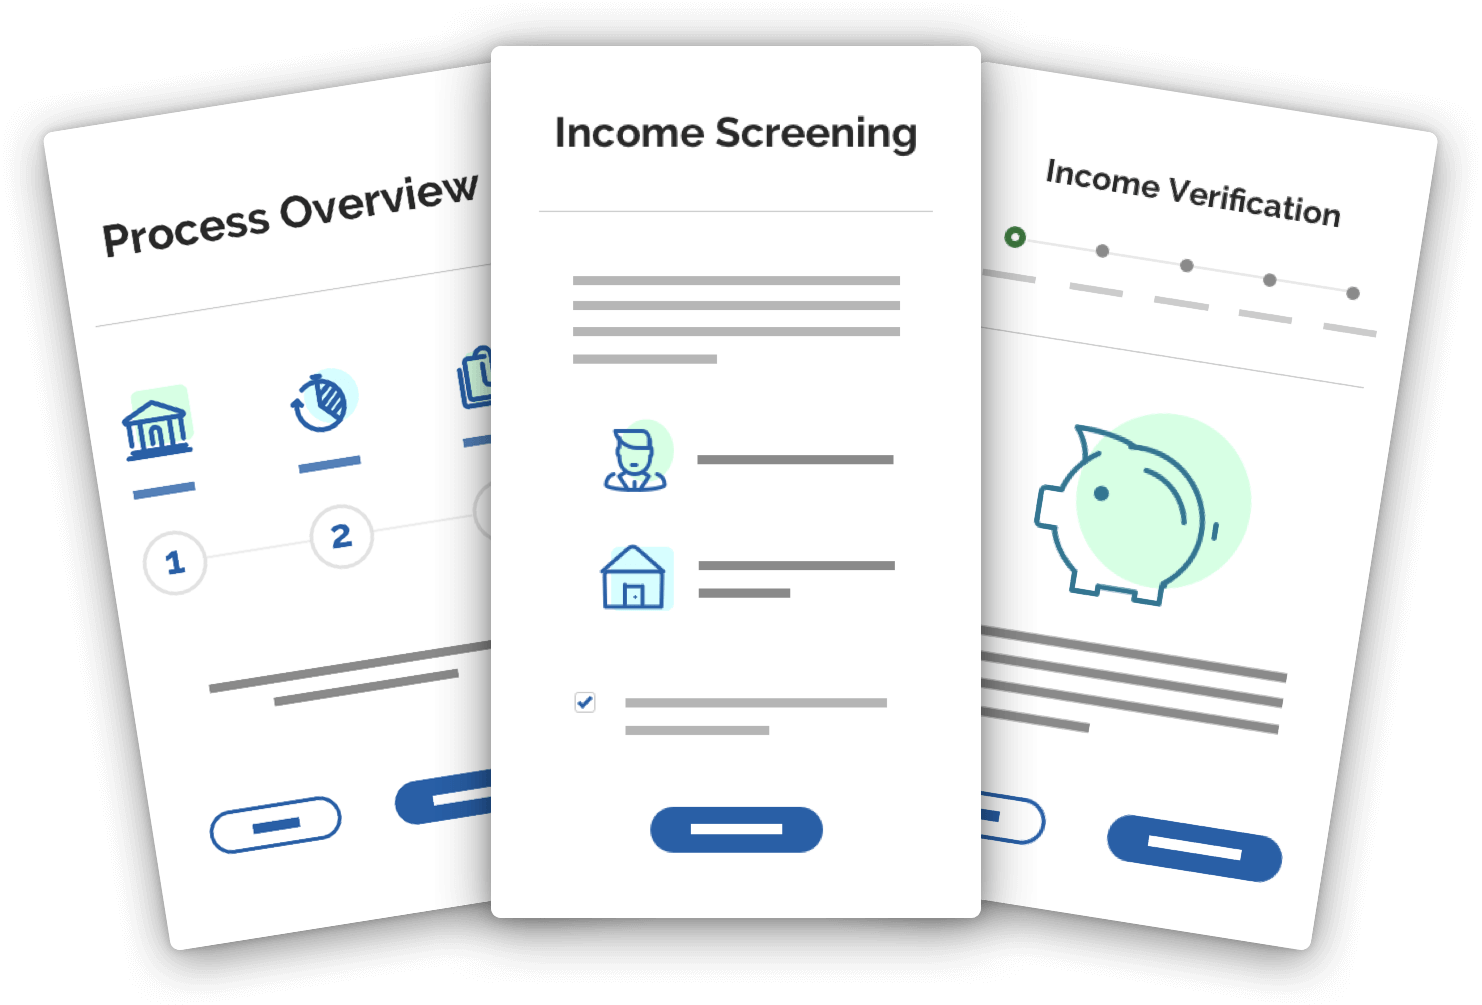 get started on our income verification in 5 minutes